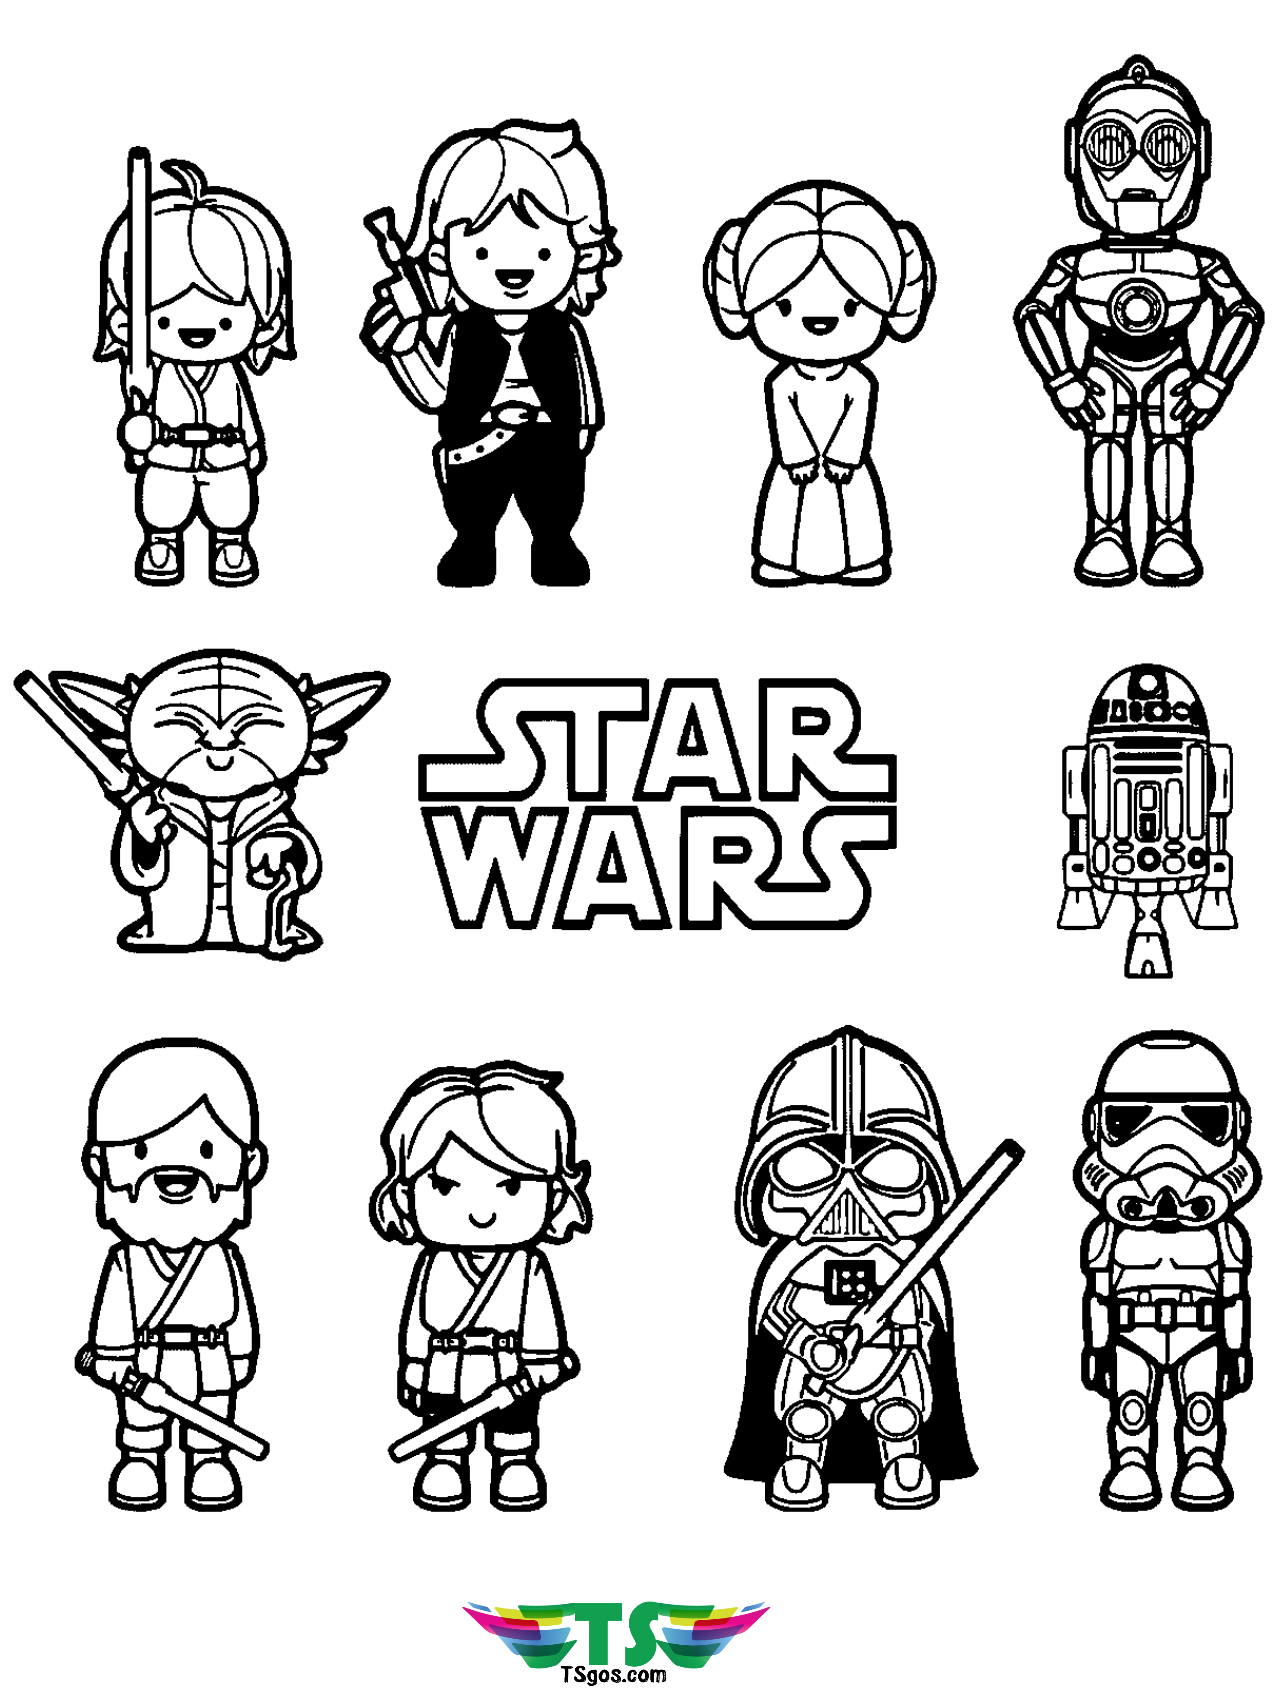 Star Wars cartoon characters coloring page.